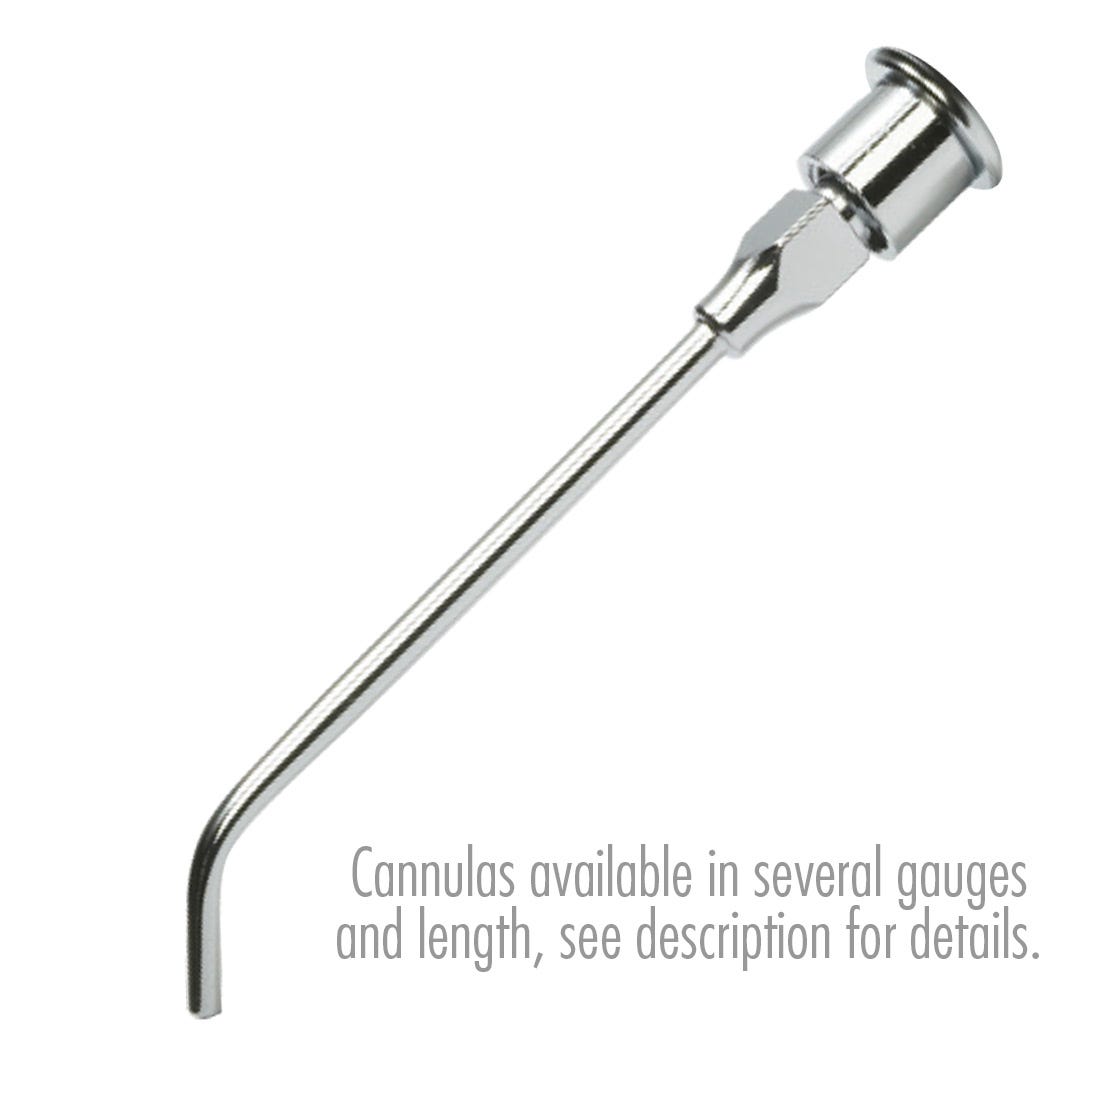 ACE Irrigation Cannula - Stainless Steel 16G x 2", 45 degree angle